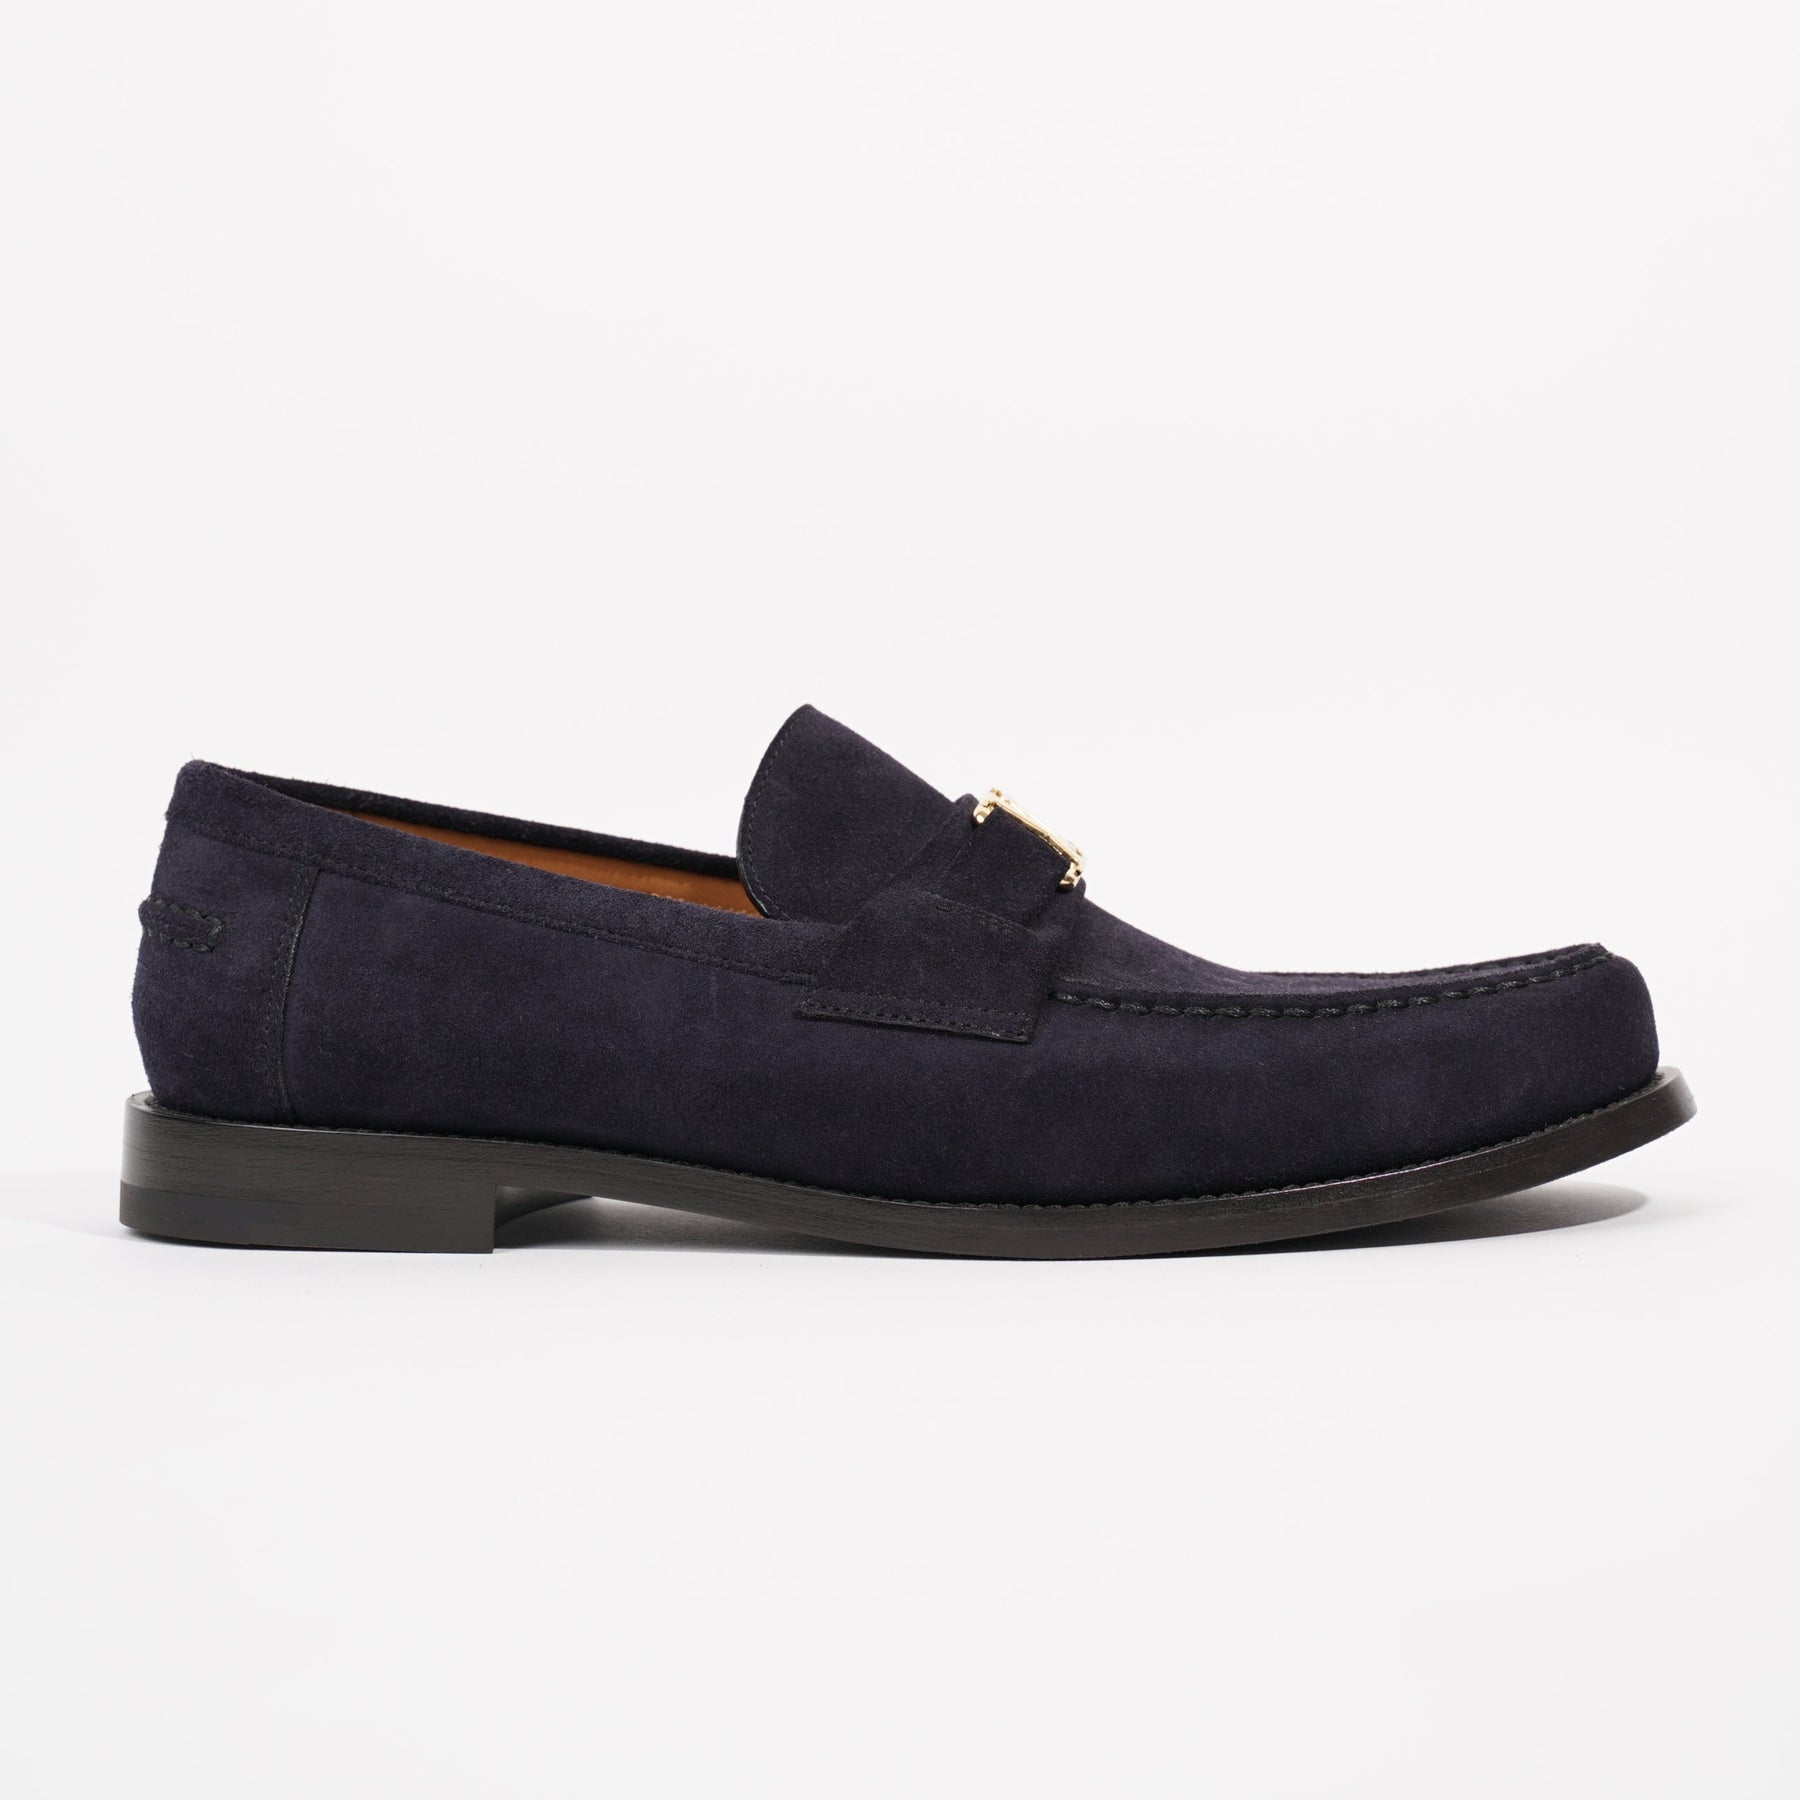 Louis Vuitton Navy Blue Suede slip on Loafers Shoes 9UK 10US 43EU ***